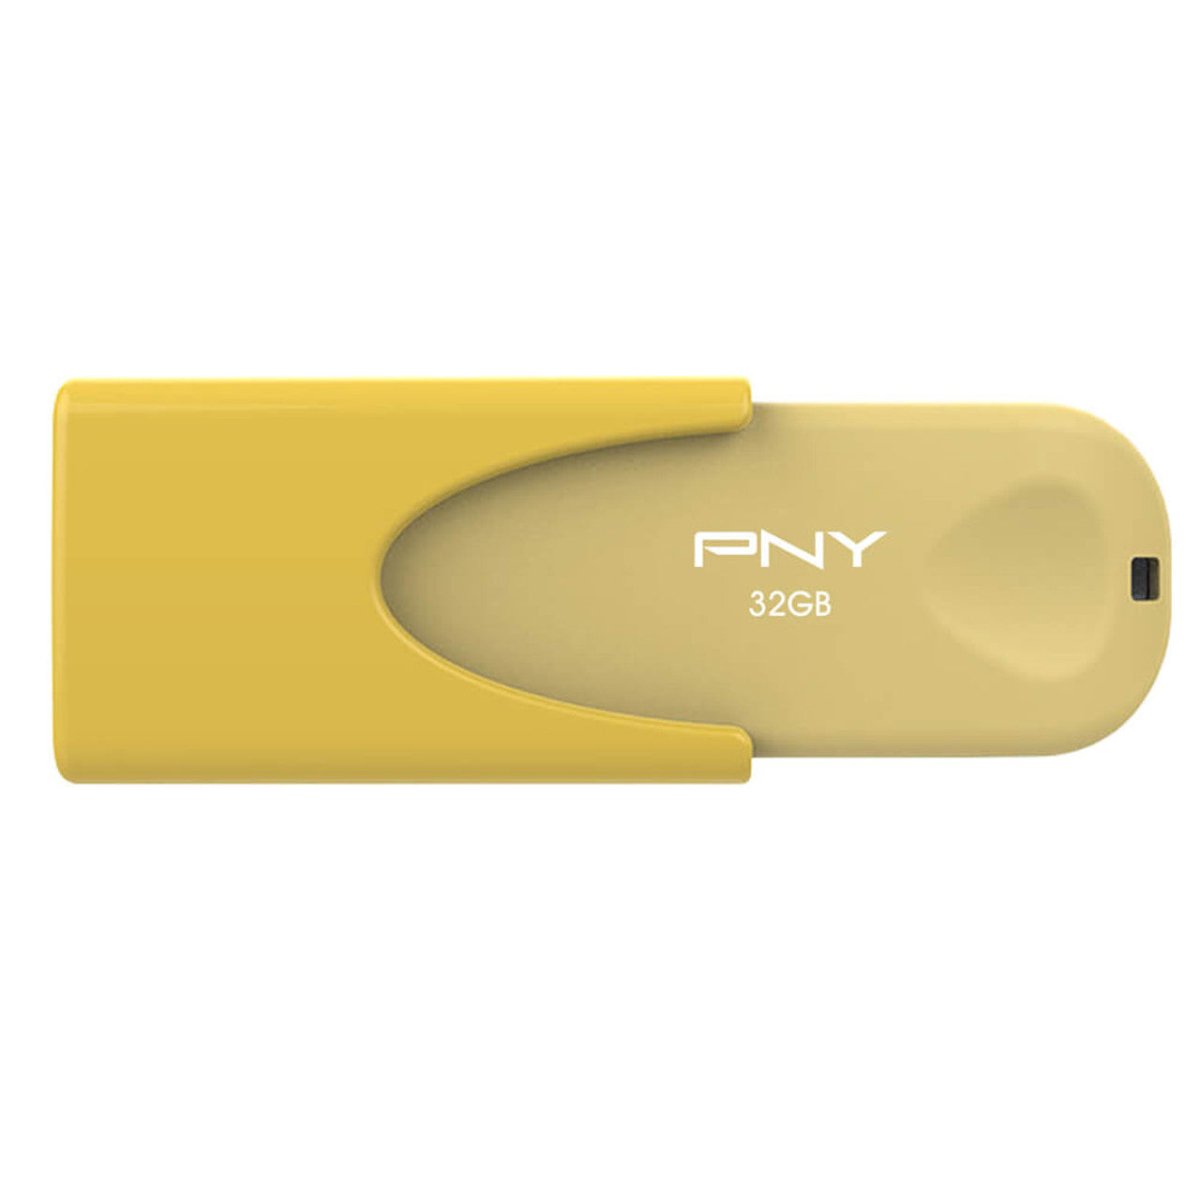 PNY USB2.0 32GB Flash Drive - I Gaming Computer | Australia Wide Shipping | Buy now, Pay Later with Afterpay, Klarna, Zip, Latitude & Paypal